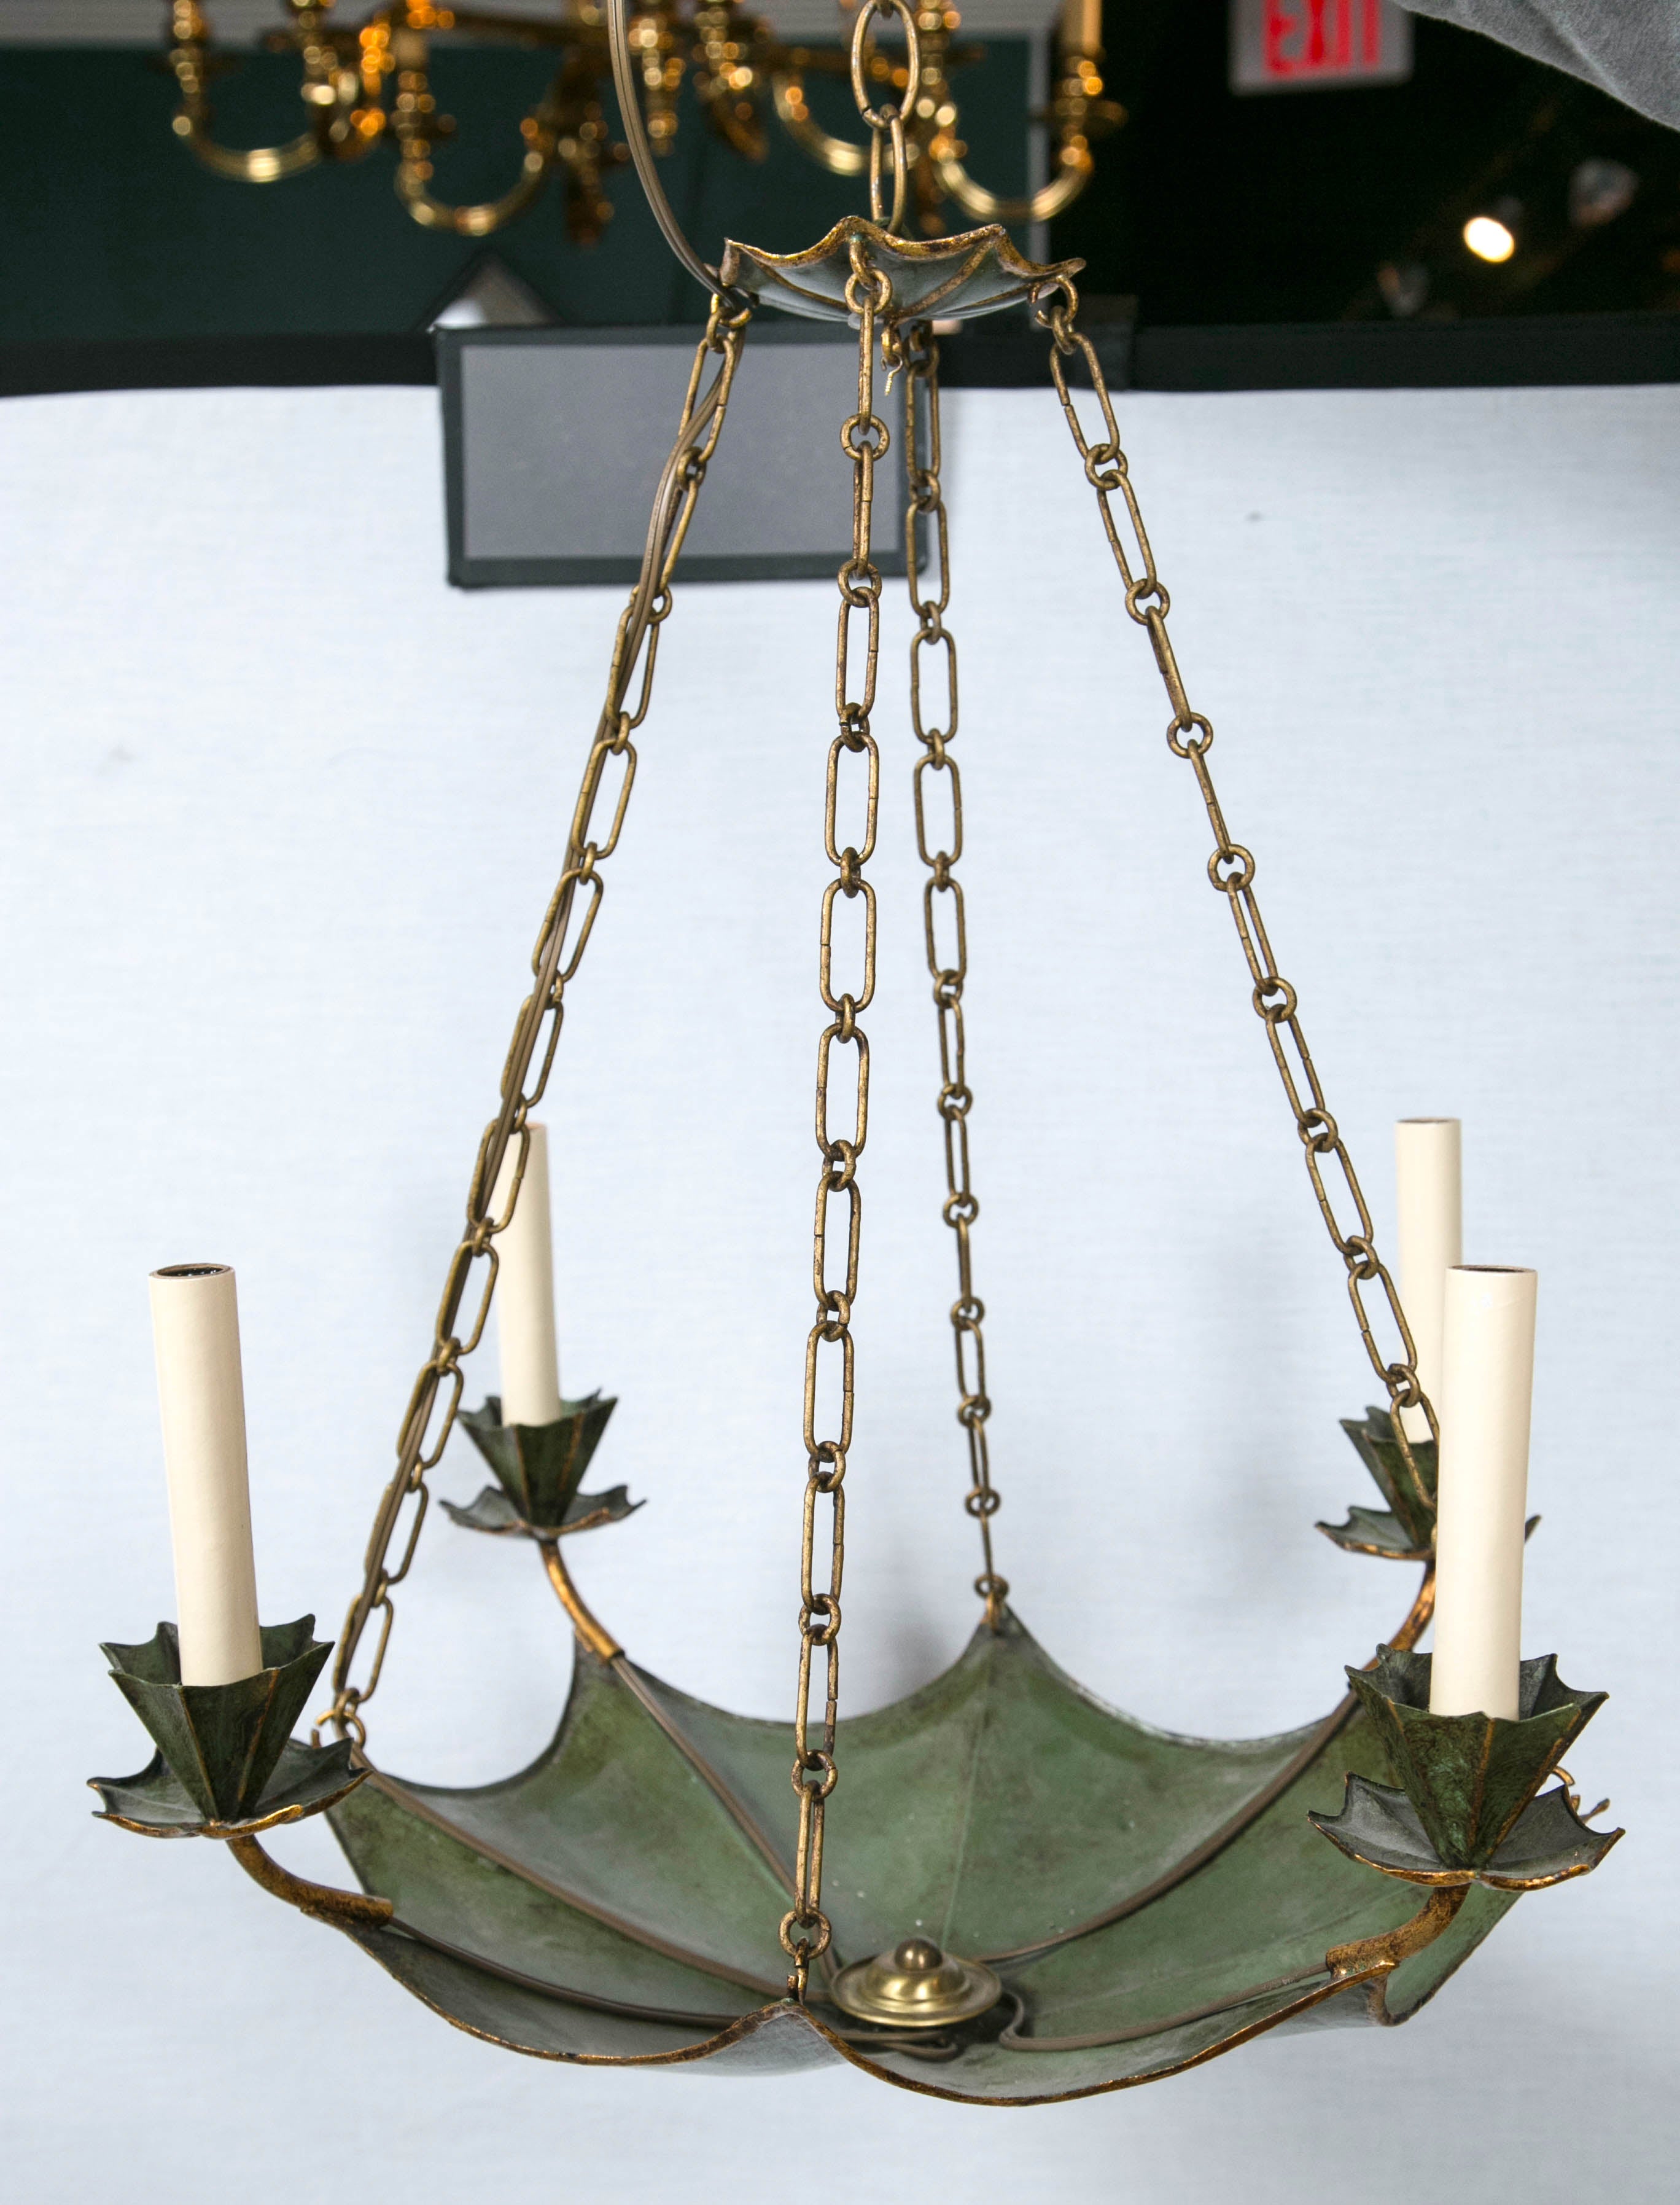 Rare 1930s French chandelier newly wired original condition.